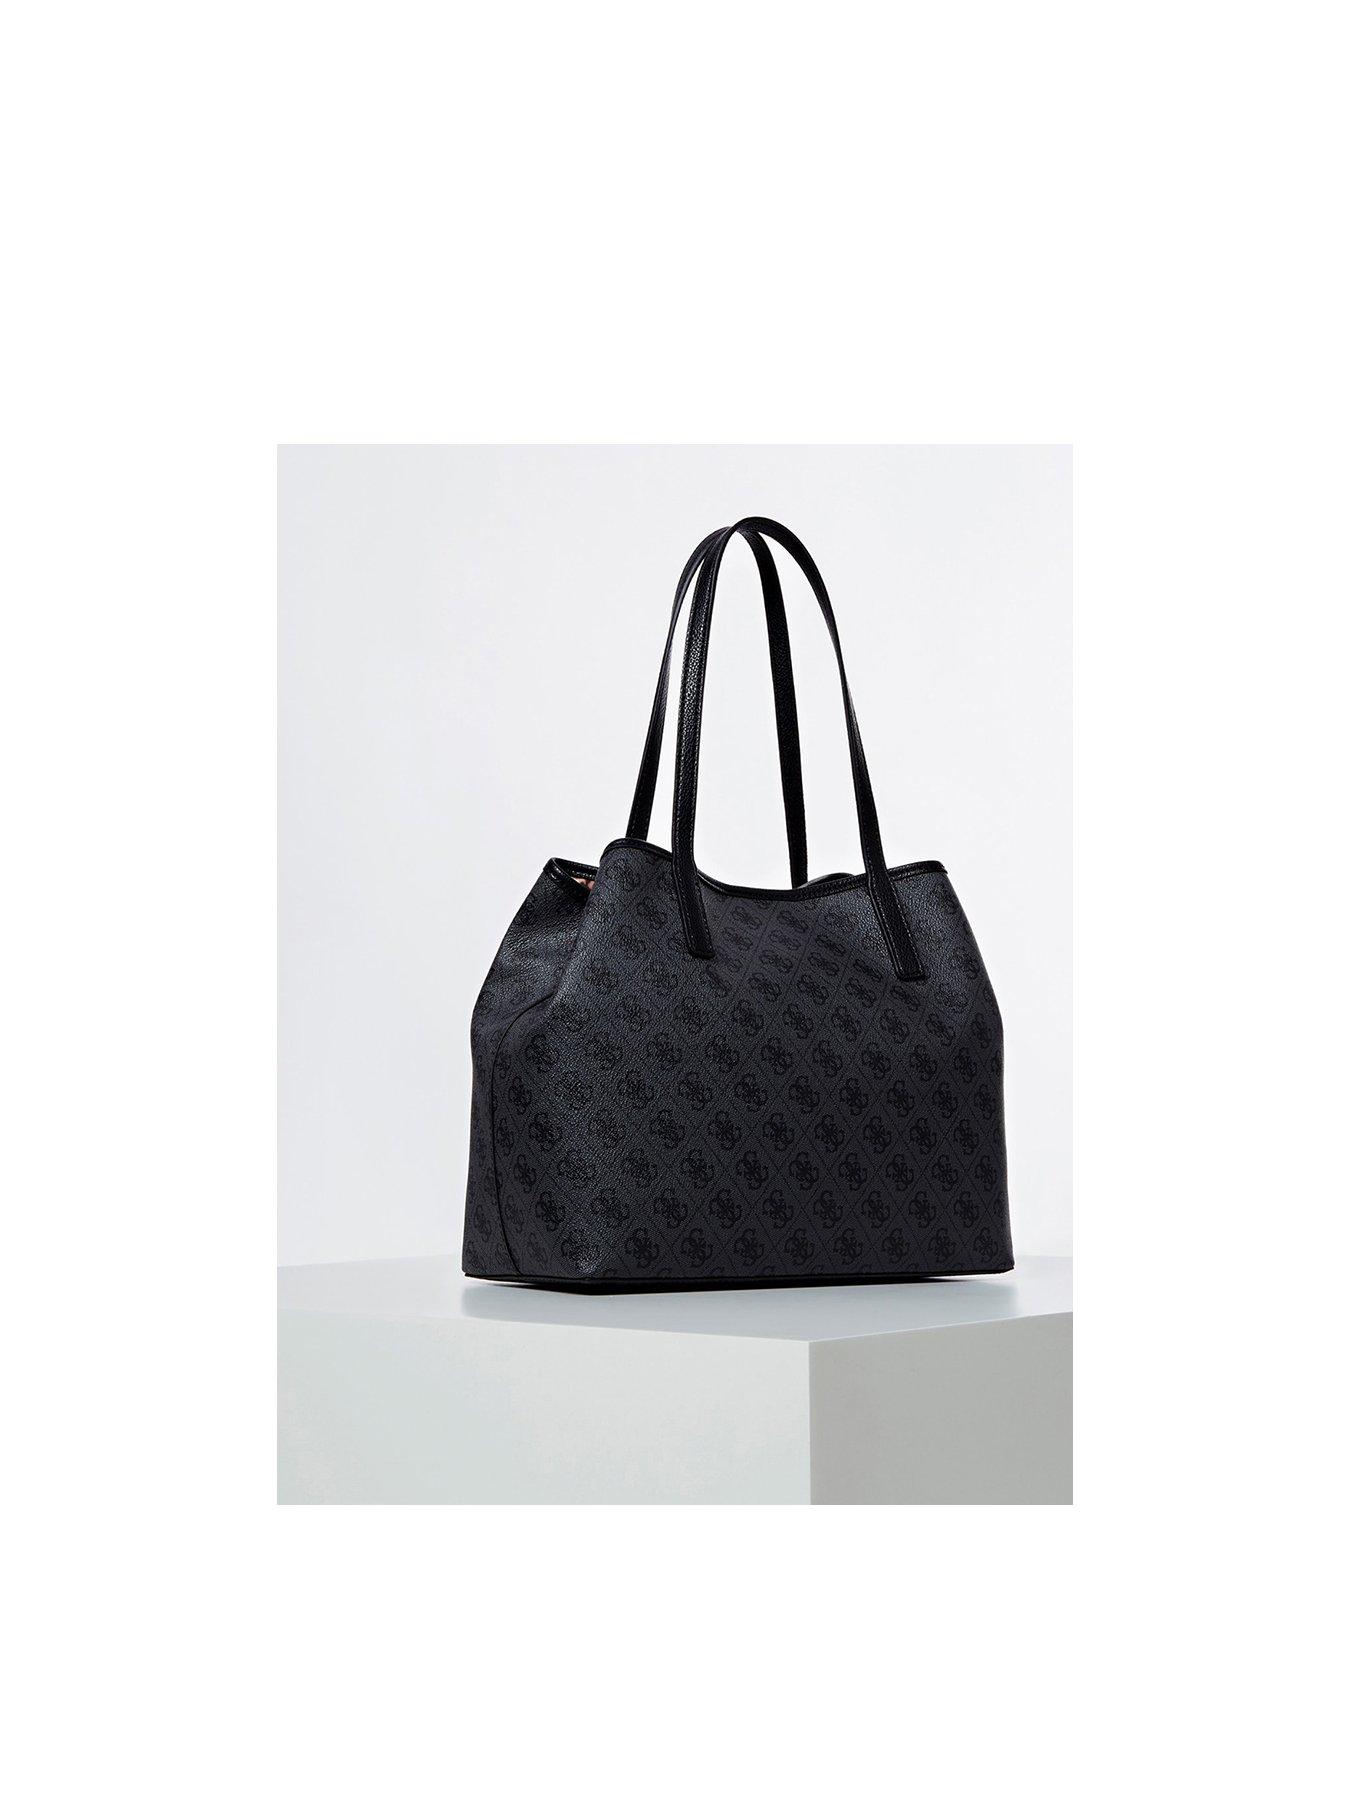 Guess Sg699524 Vikky Tote Bag In Coal Size UK 3 - 8